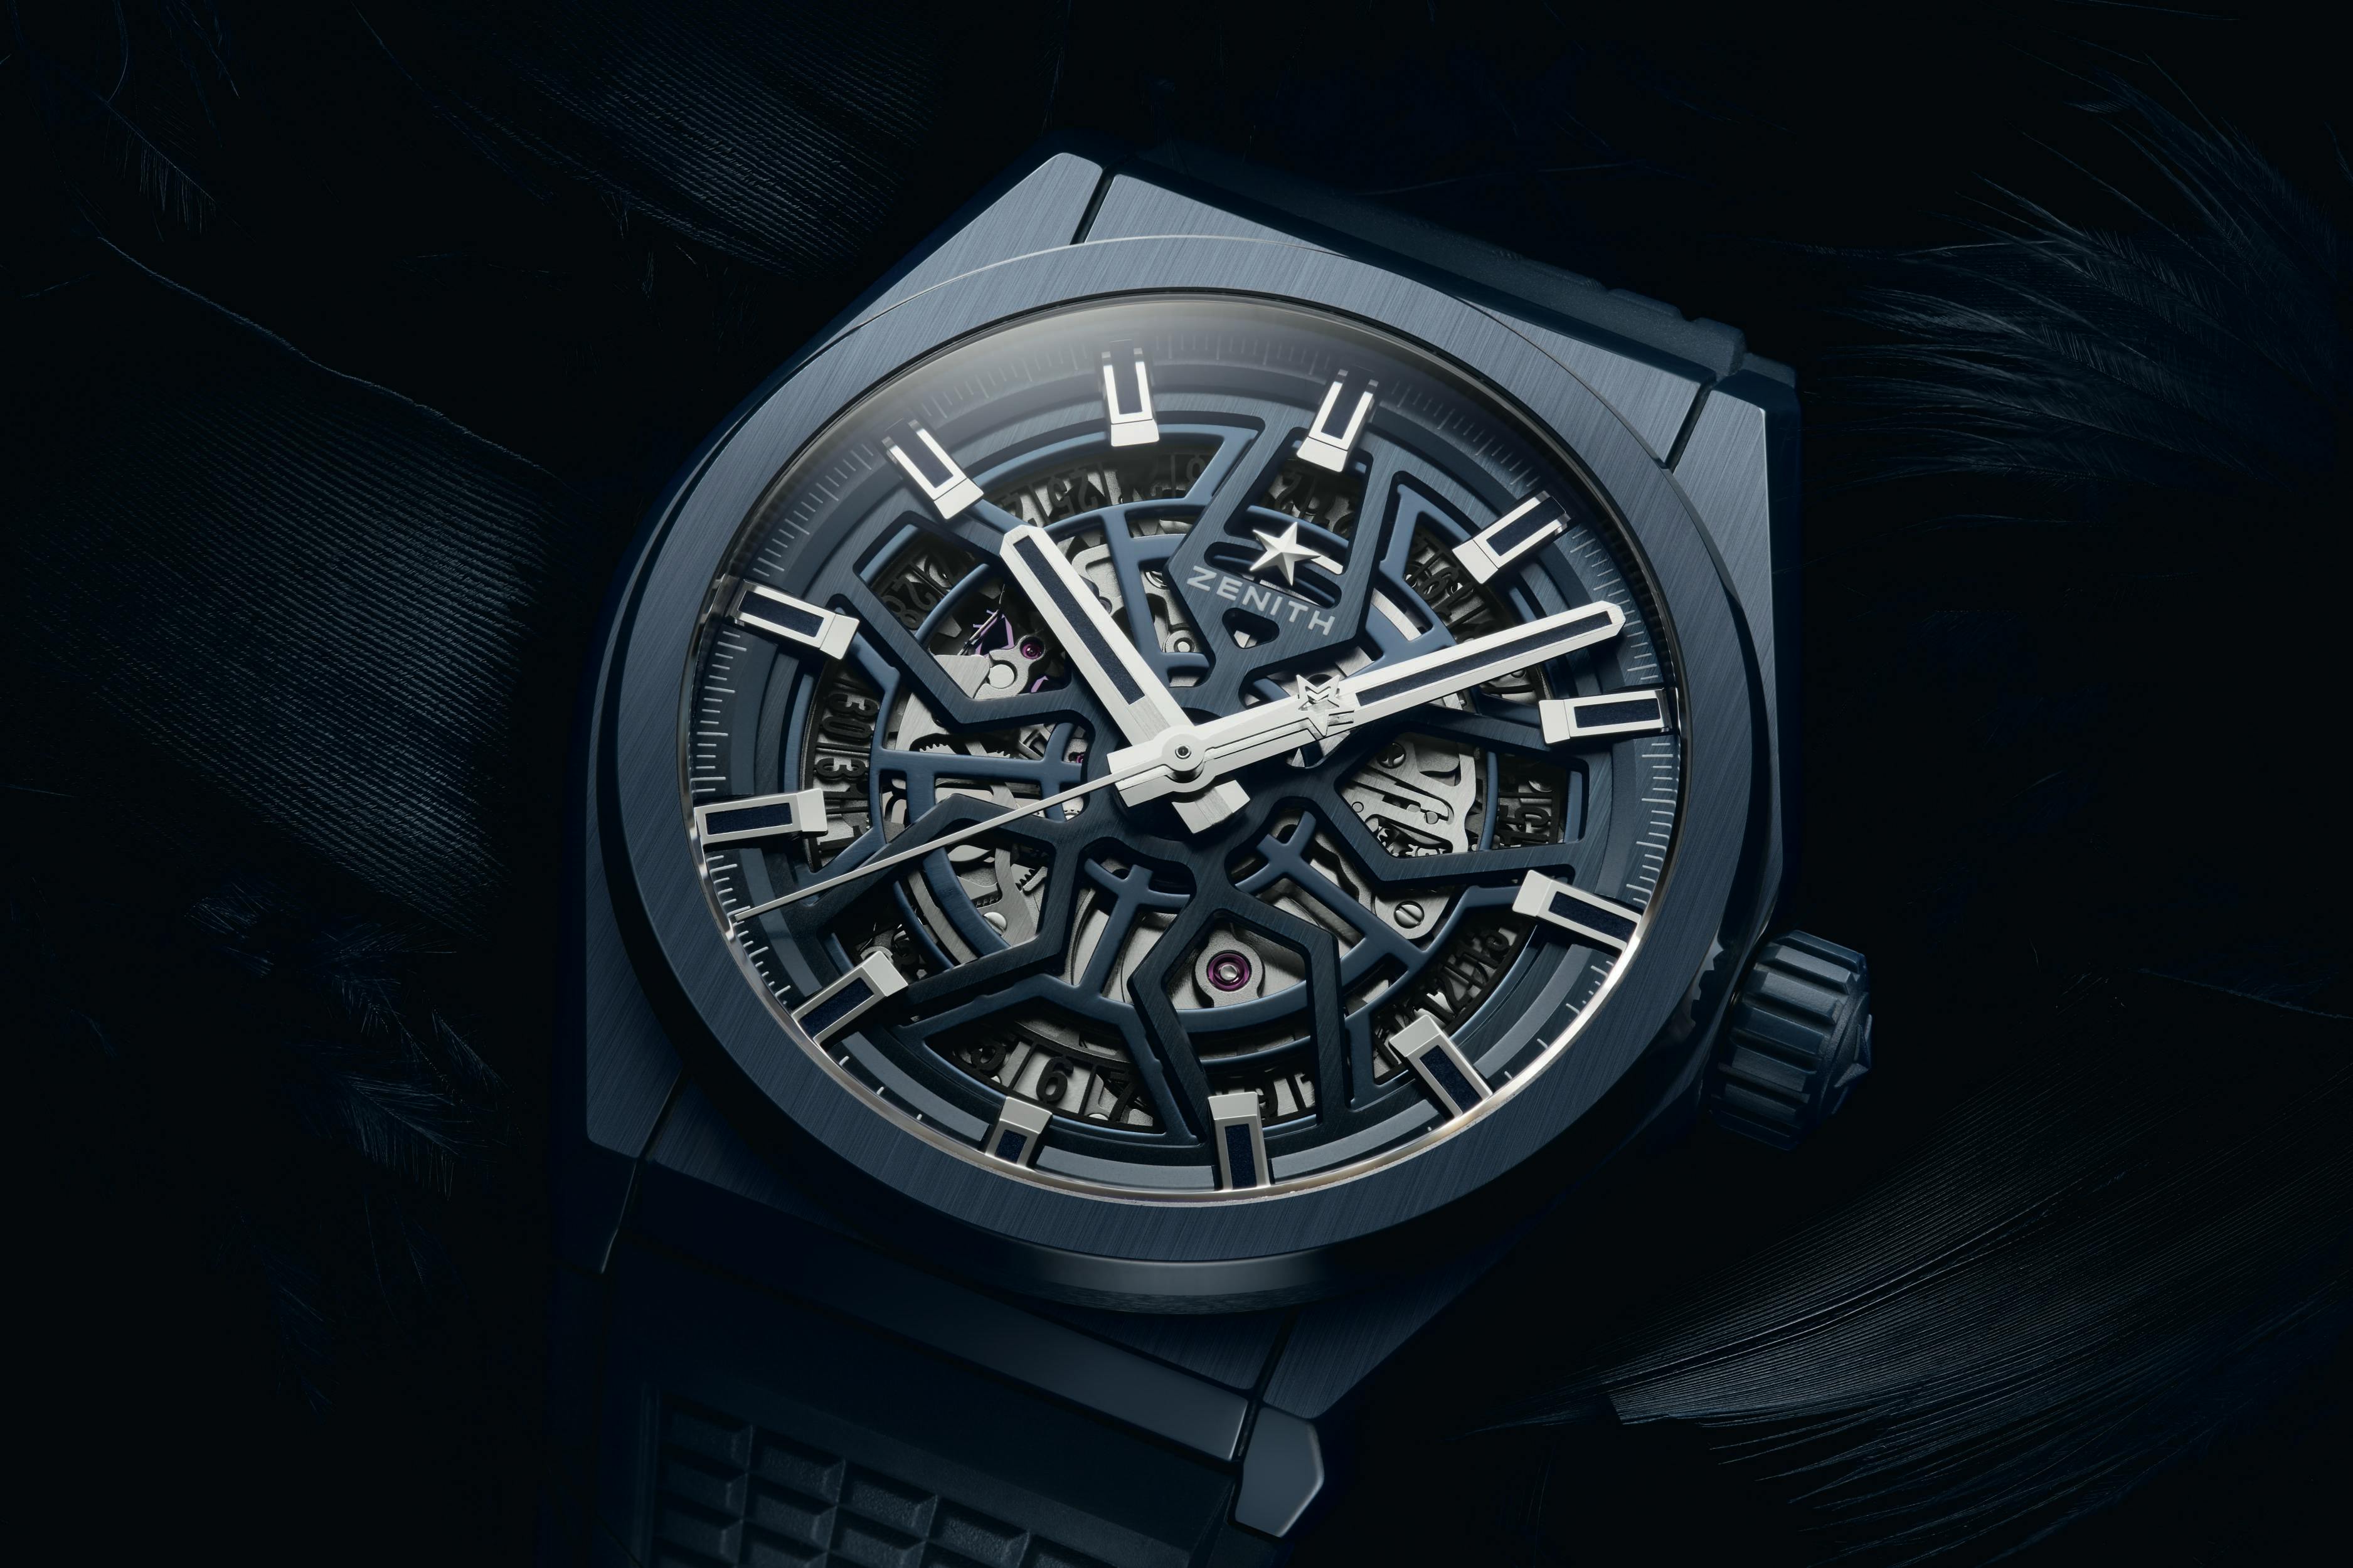 DEFY Classic Blue Ceramic with skeleton dial - ZENITH